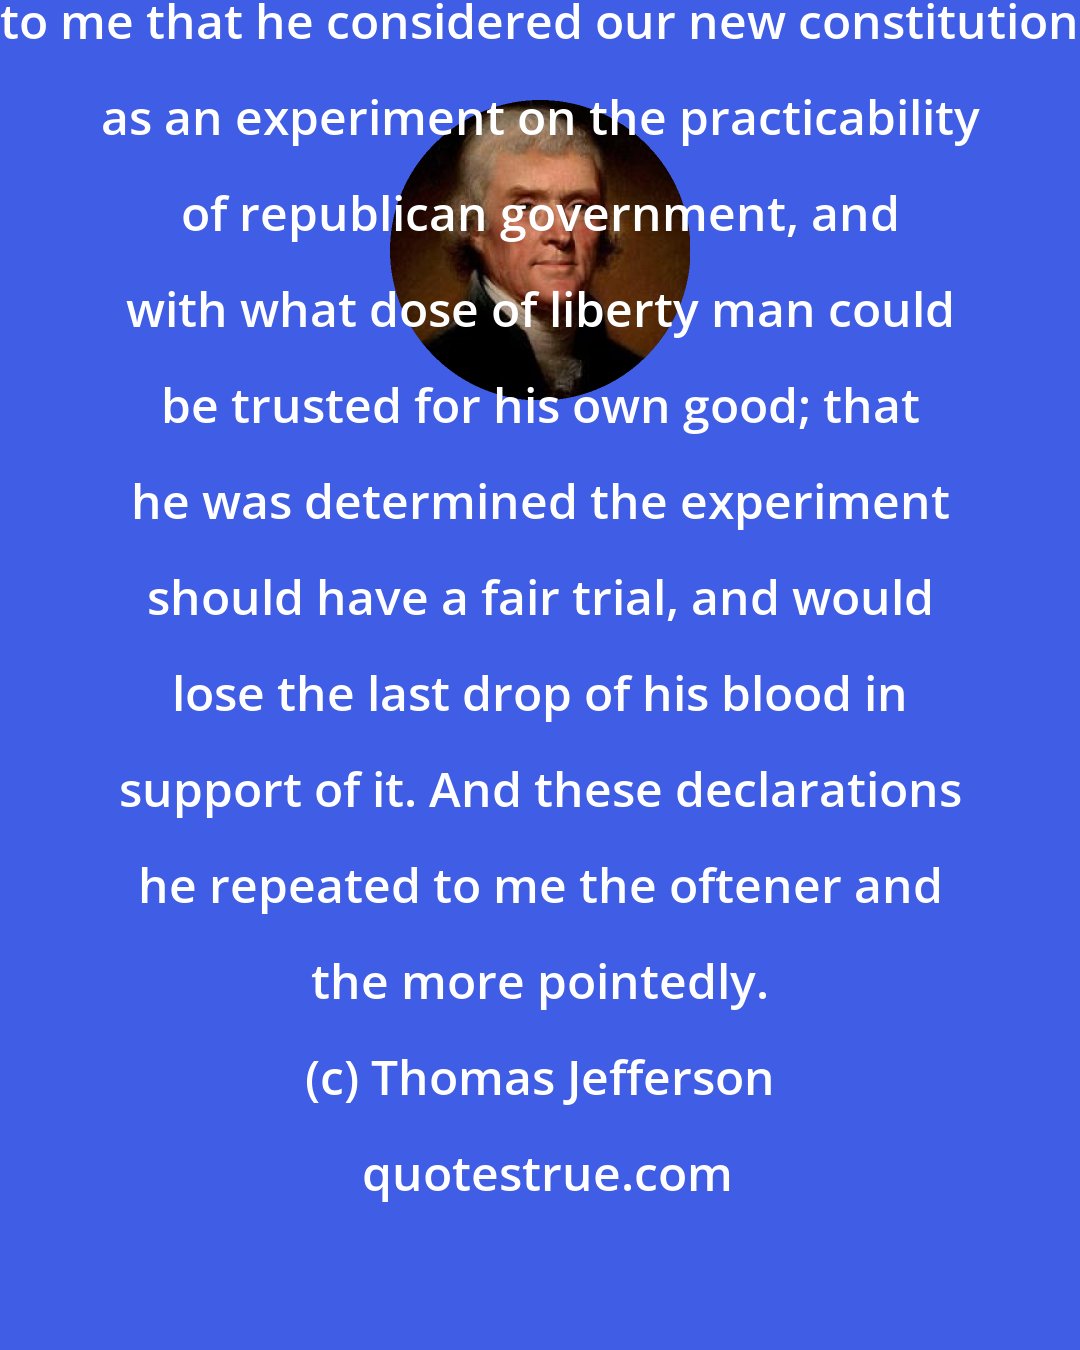 Thomas Jefferson: He [Washington] has often declared to me that he considered our new constitution as an experiment on the practicability of republican government, and with what dose of liberty man could be trusted for his own good; that he was determined the experiment should have a fair trial, and would lose the last drop of his blood in support of it. And these declarations he repeated to me the oftener and the more pointedly.